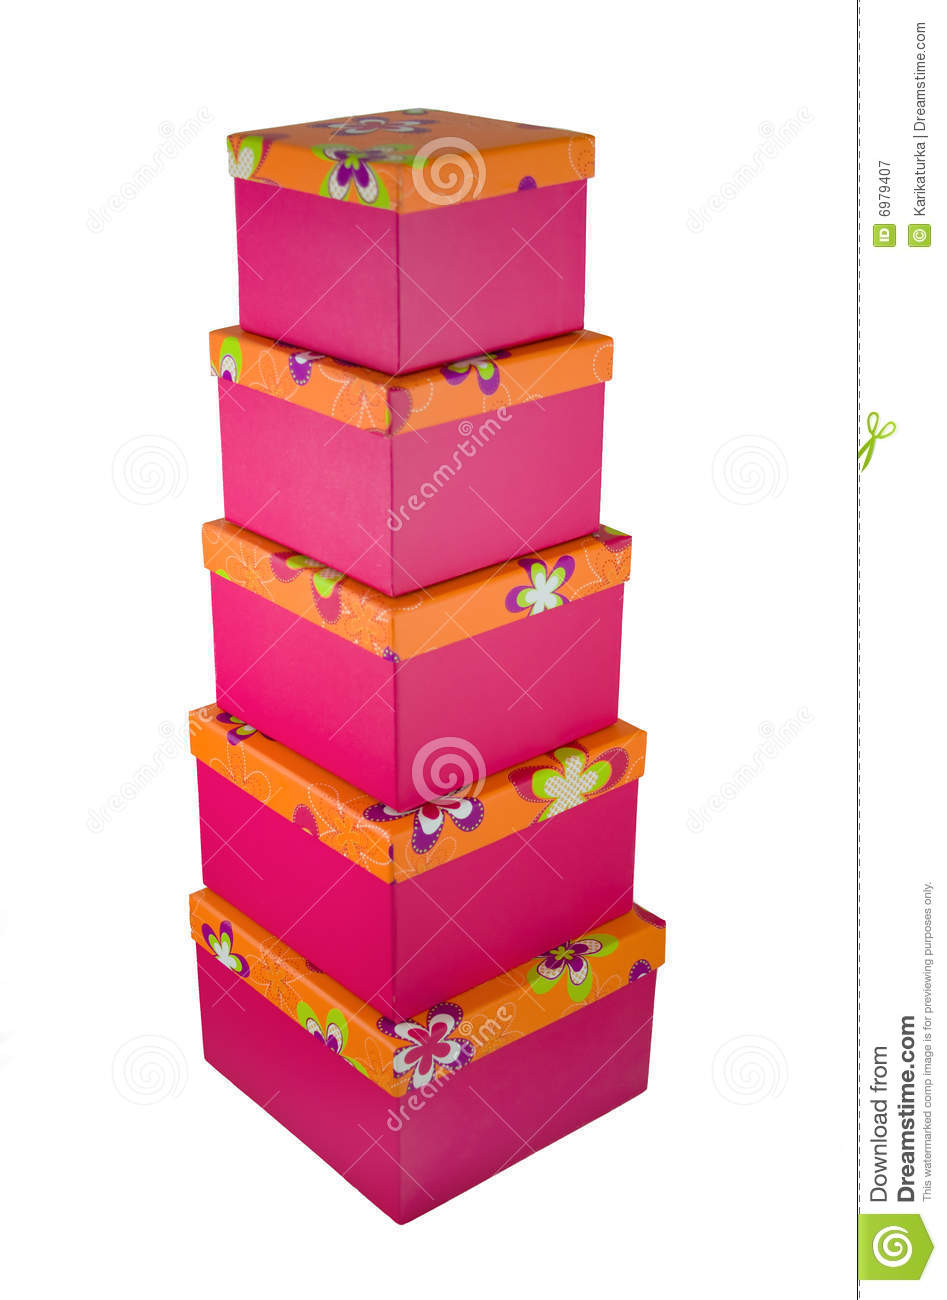 Gift Boxes 2 Royalty Free Stock Photography   Image  6979407